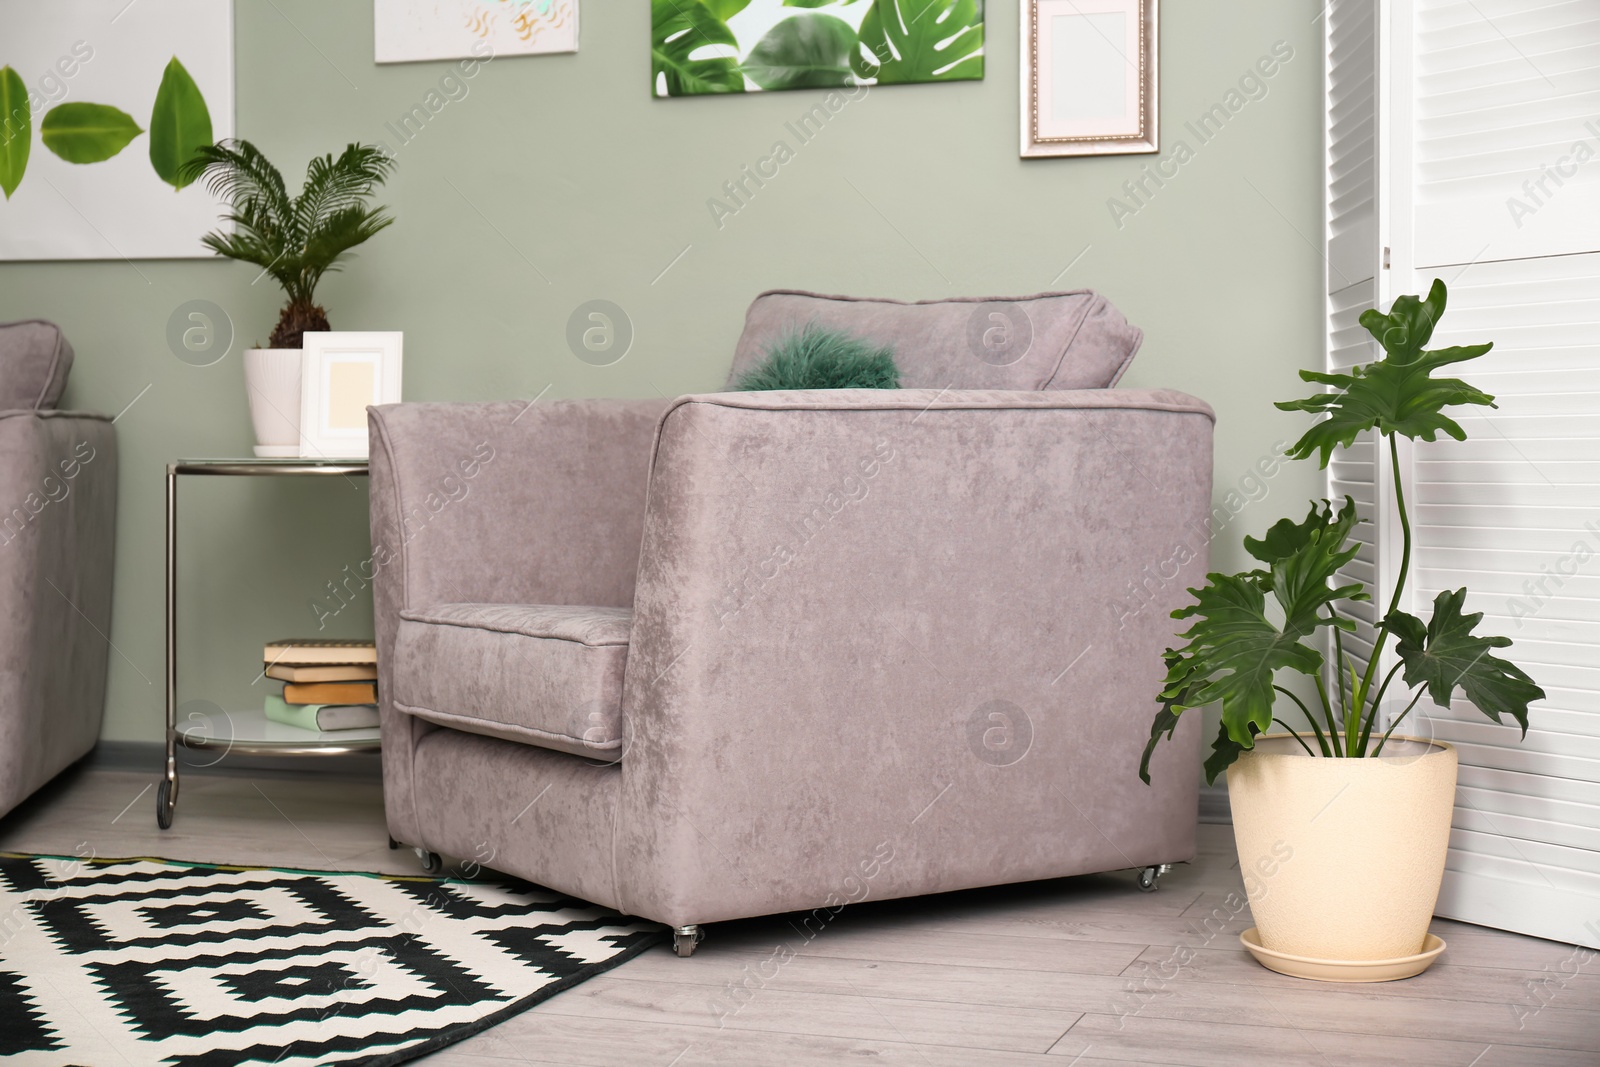 Photo of Tropical plants with green leaves and comfortable armchair in room interior